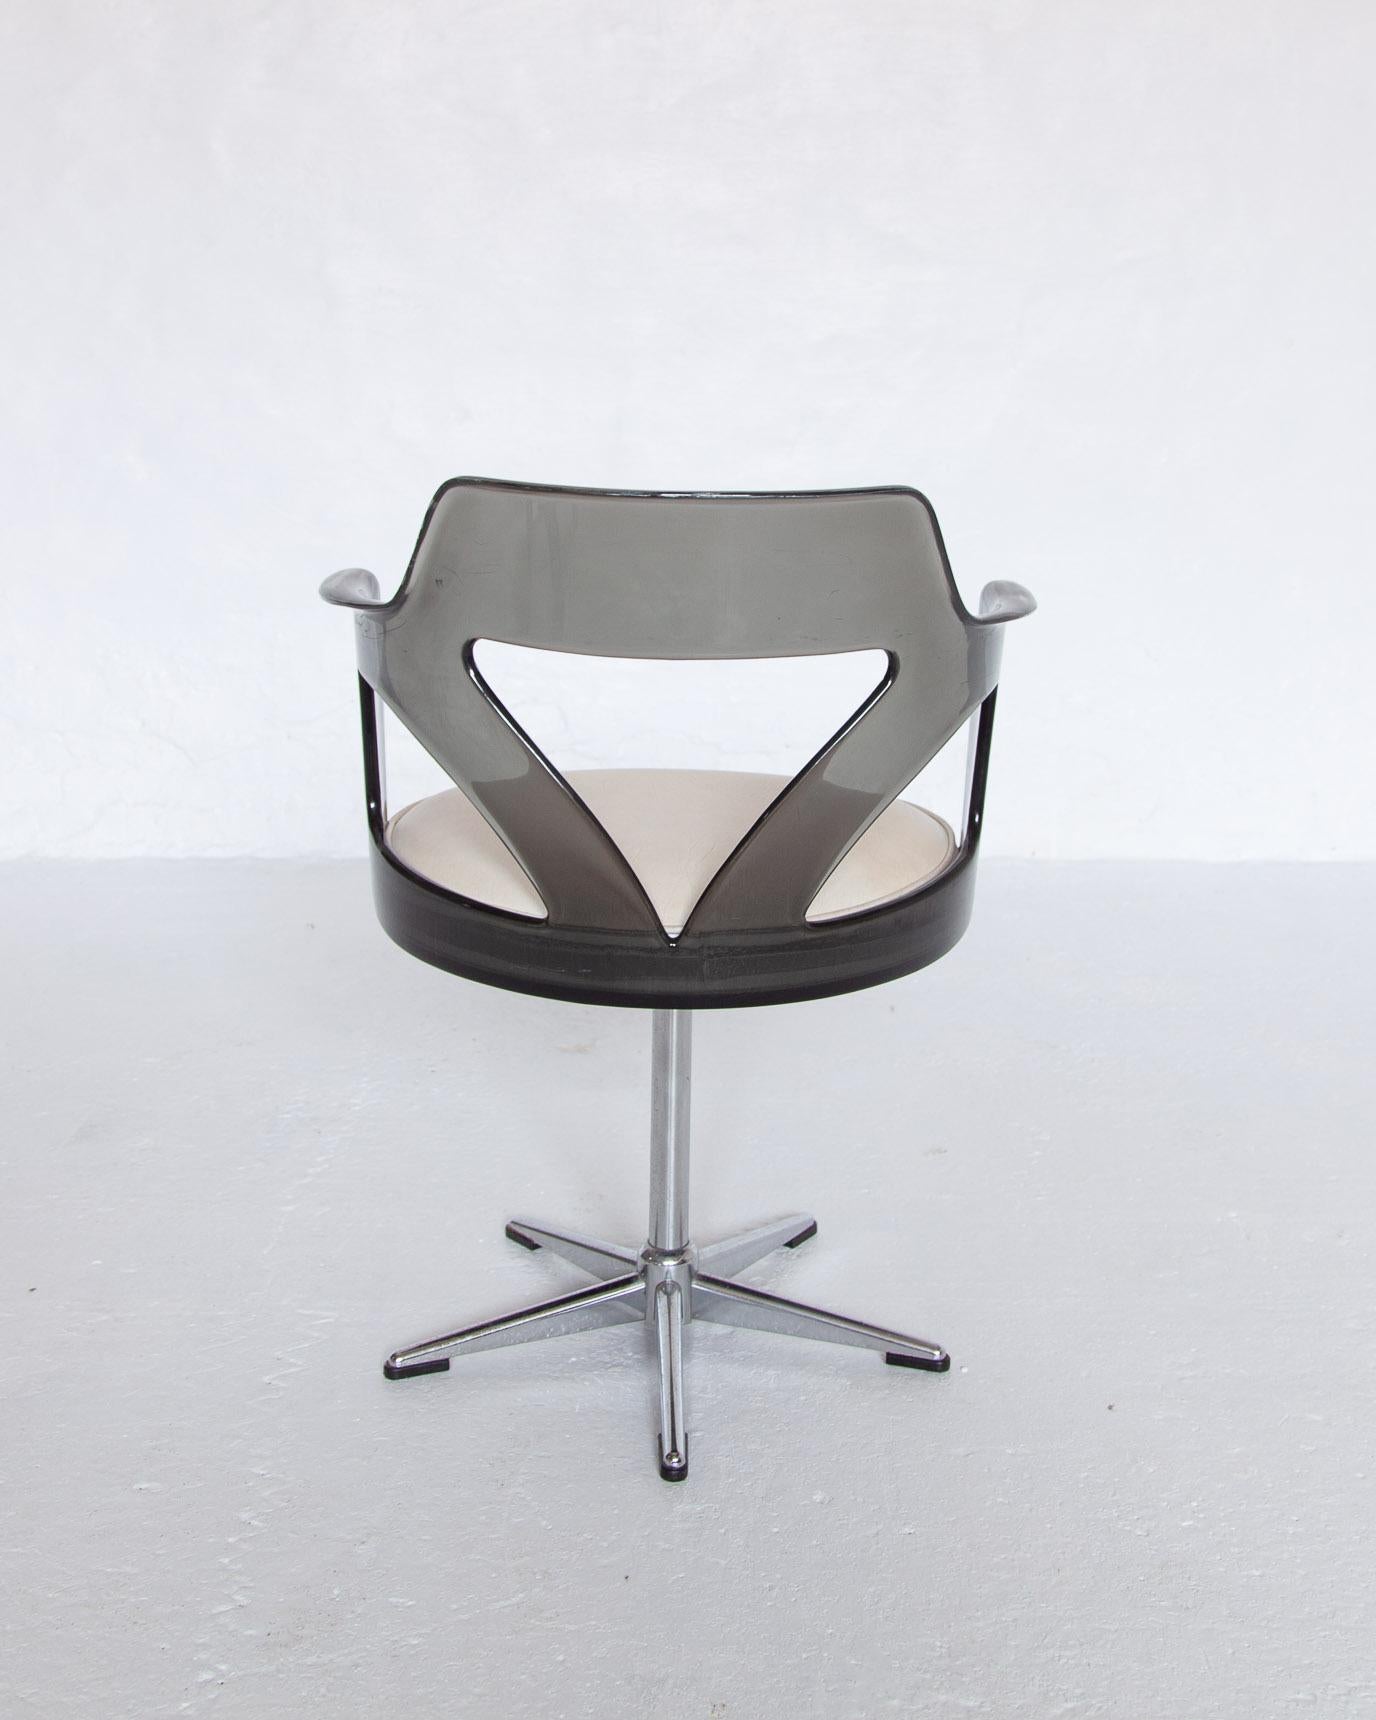 Spage Age Smoked Plexi Glass Swivel Desk Chair, 1960s In Good Condition For Sale In Antwerp, BE